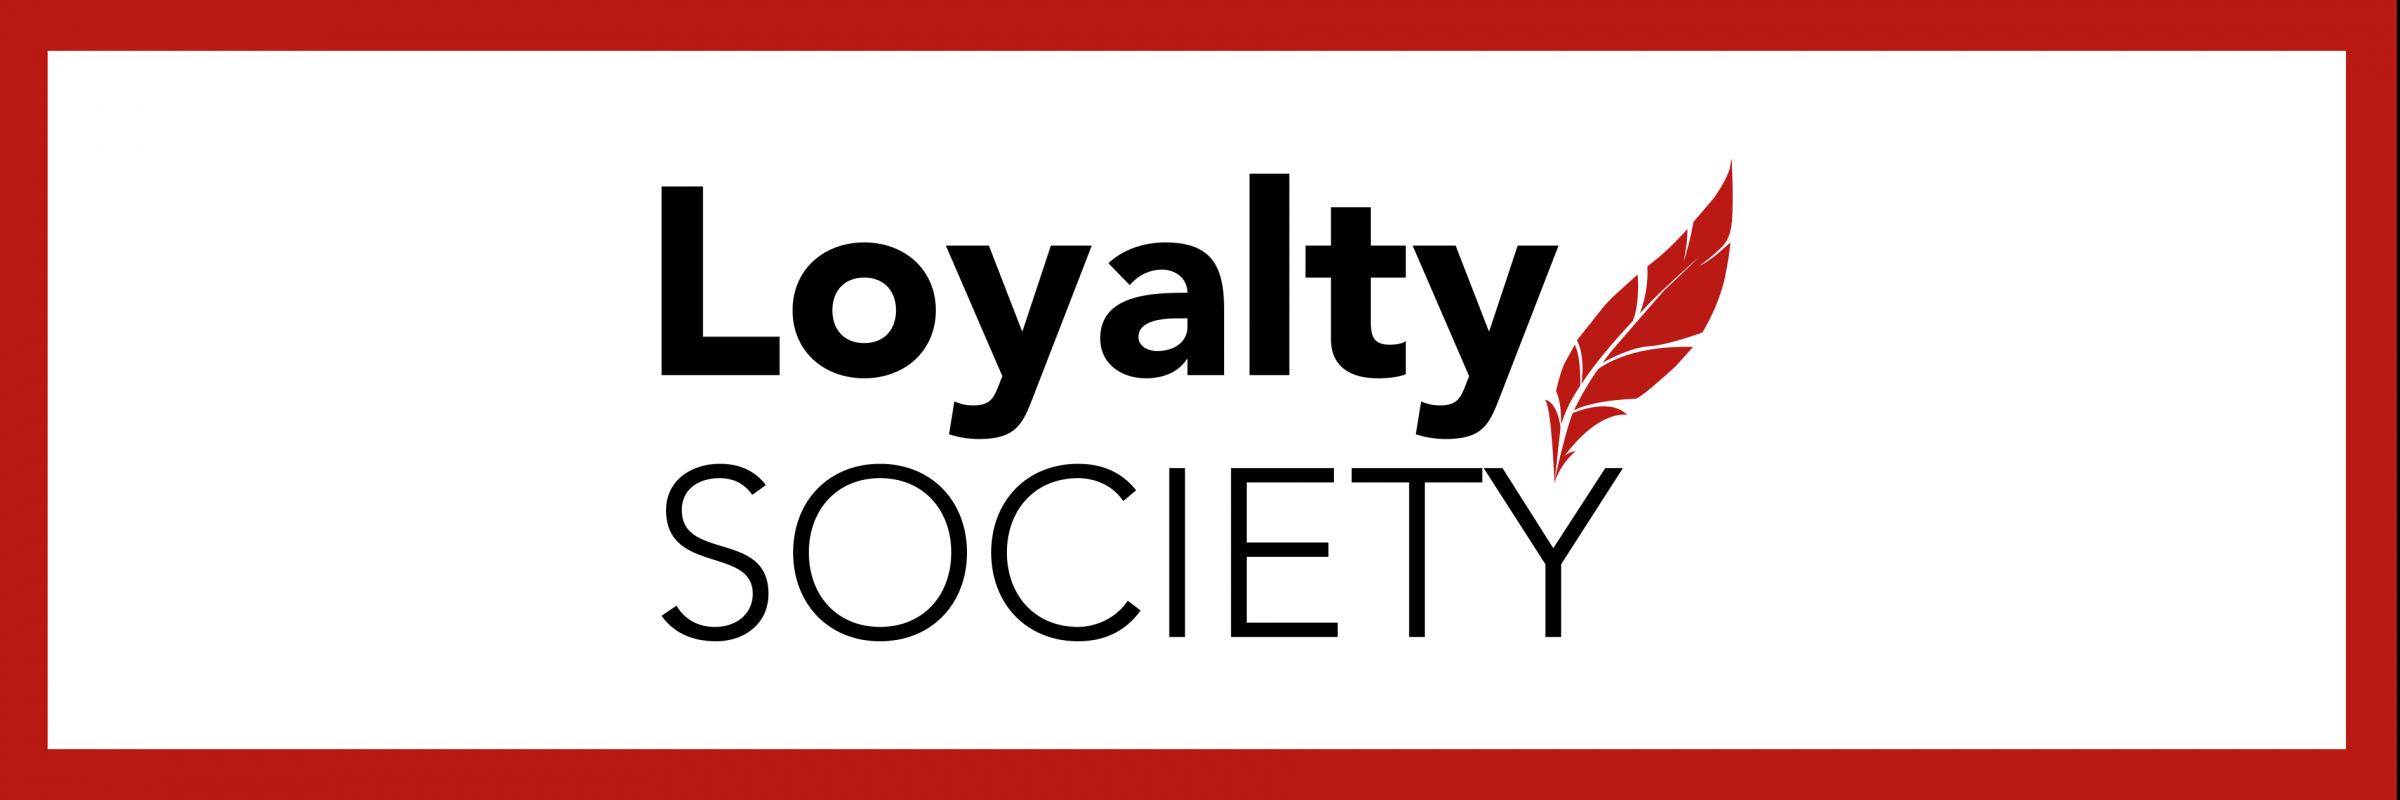 Loyalty Society logo with red feather